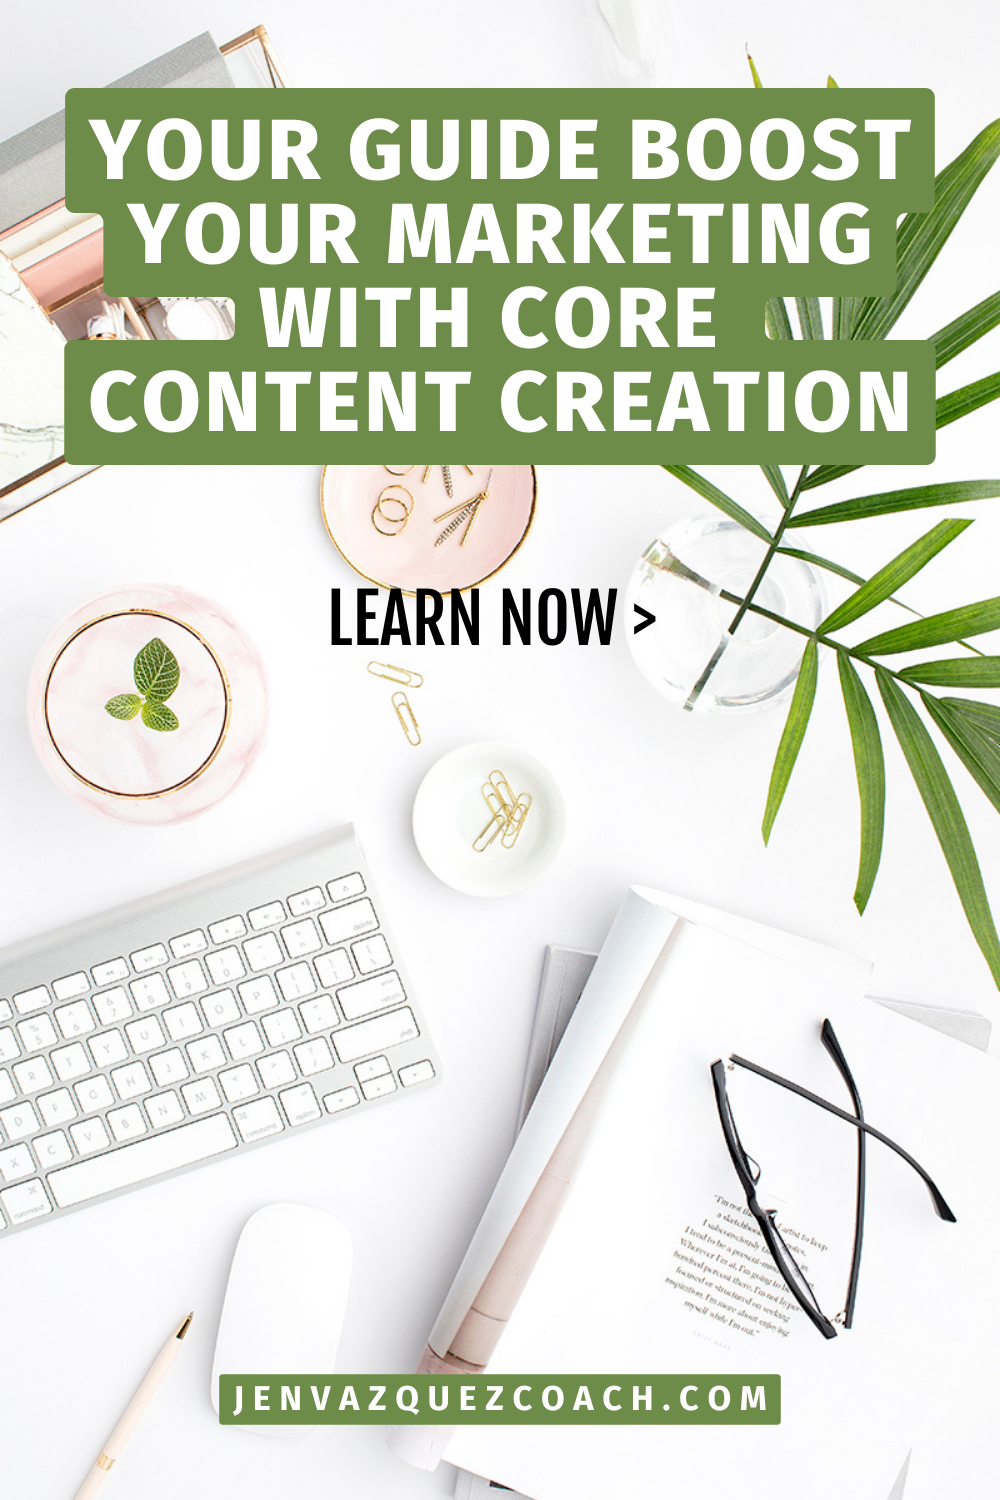 white table with greenery, keyboard, glasses, drink and magazine and words: Finding Focus: A Simple Strategy to Build a Consistent Marketing Plan by Jen Vazquez Media 